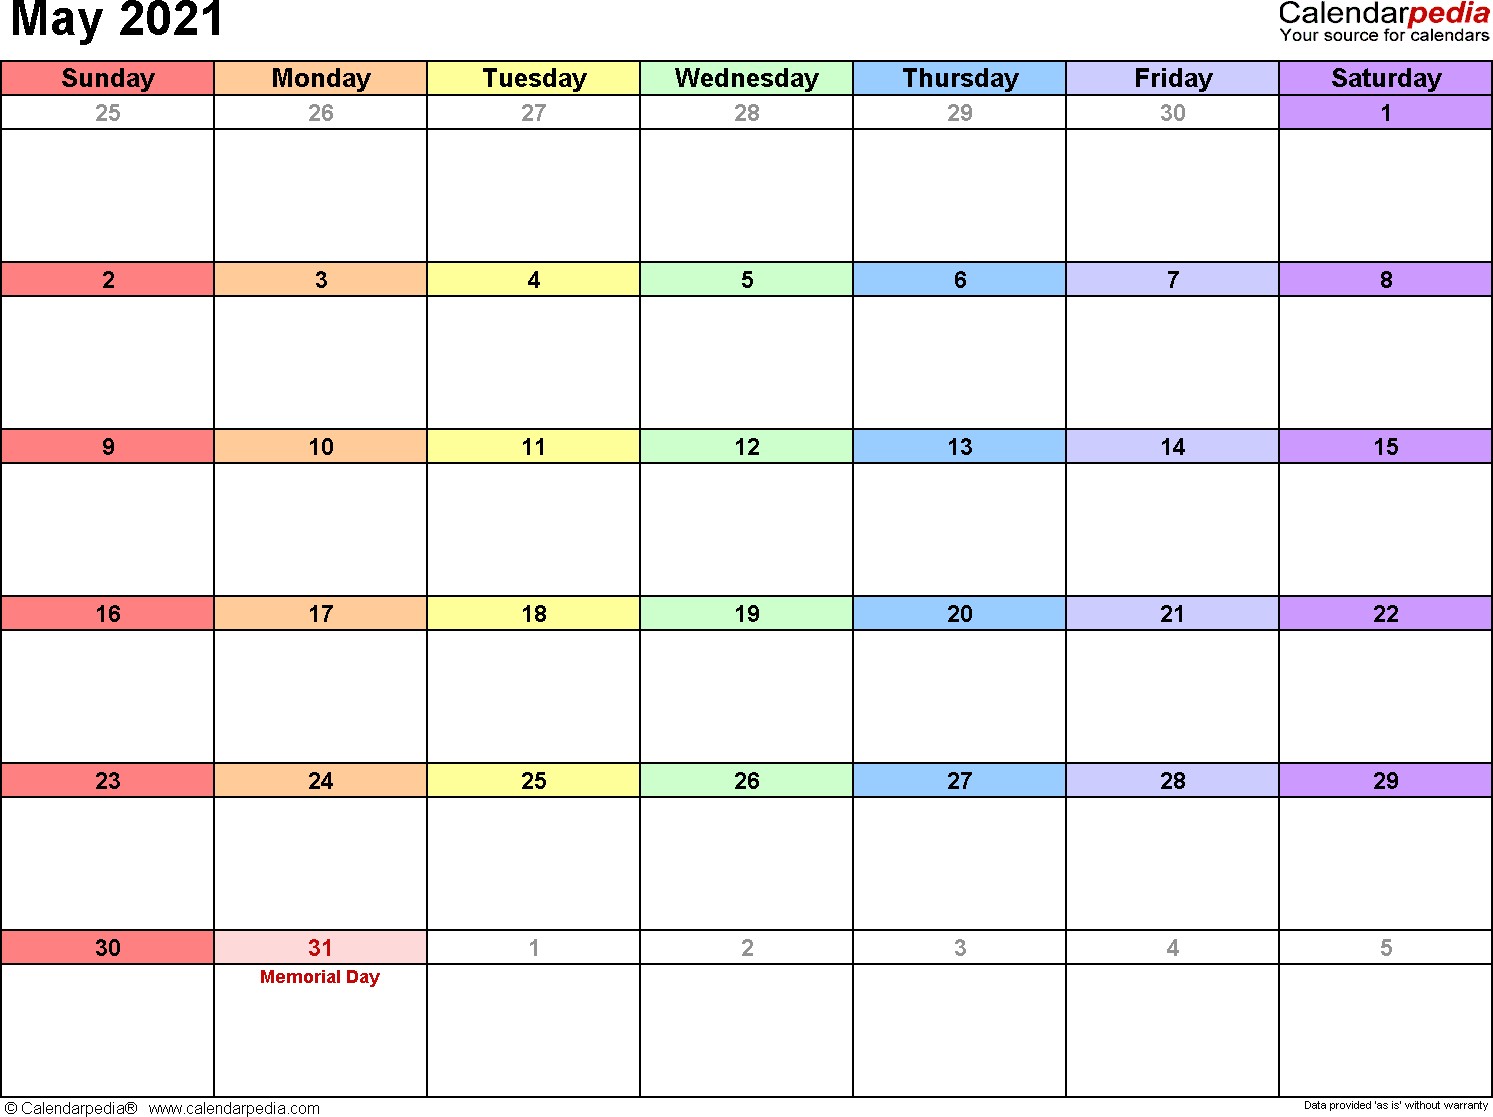 May 2021 calendar templates for Word Excel and PDF